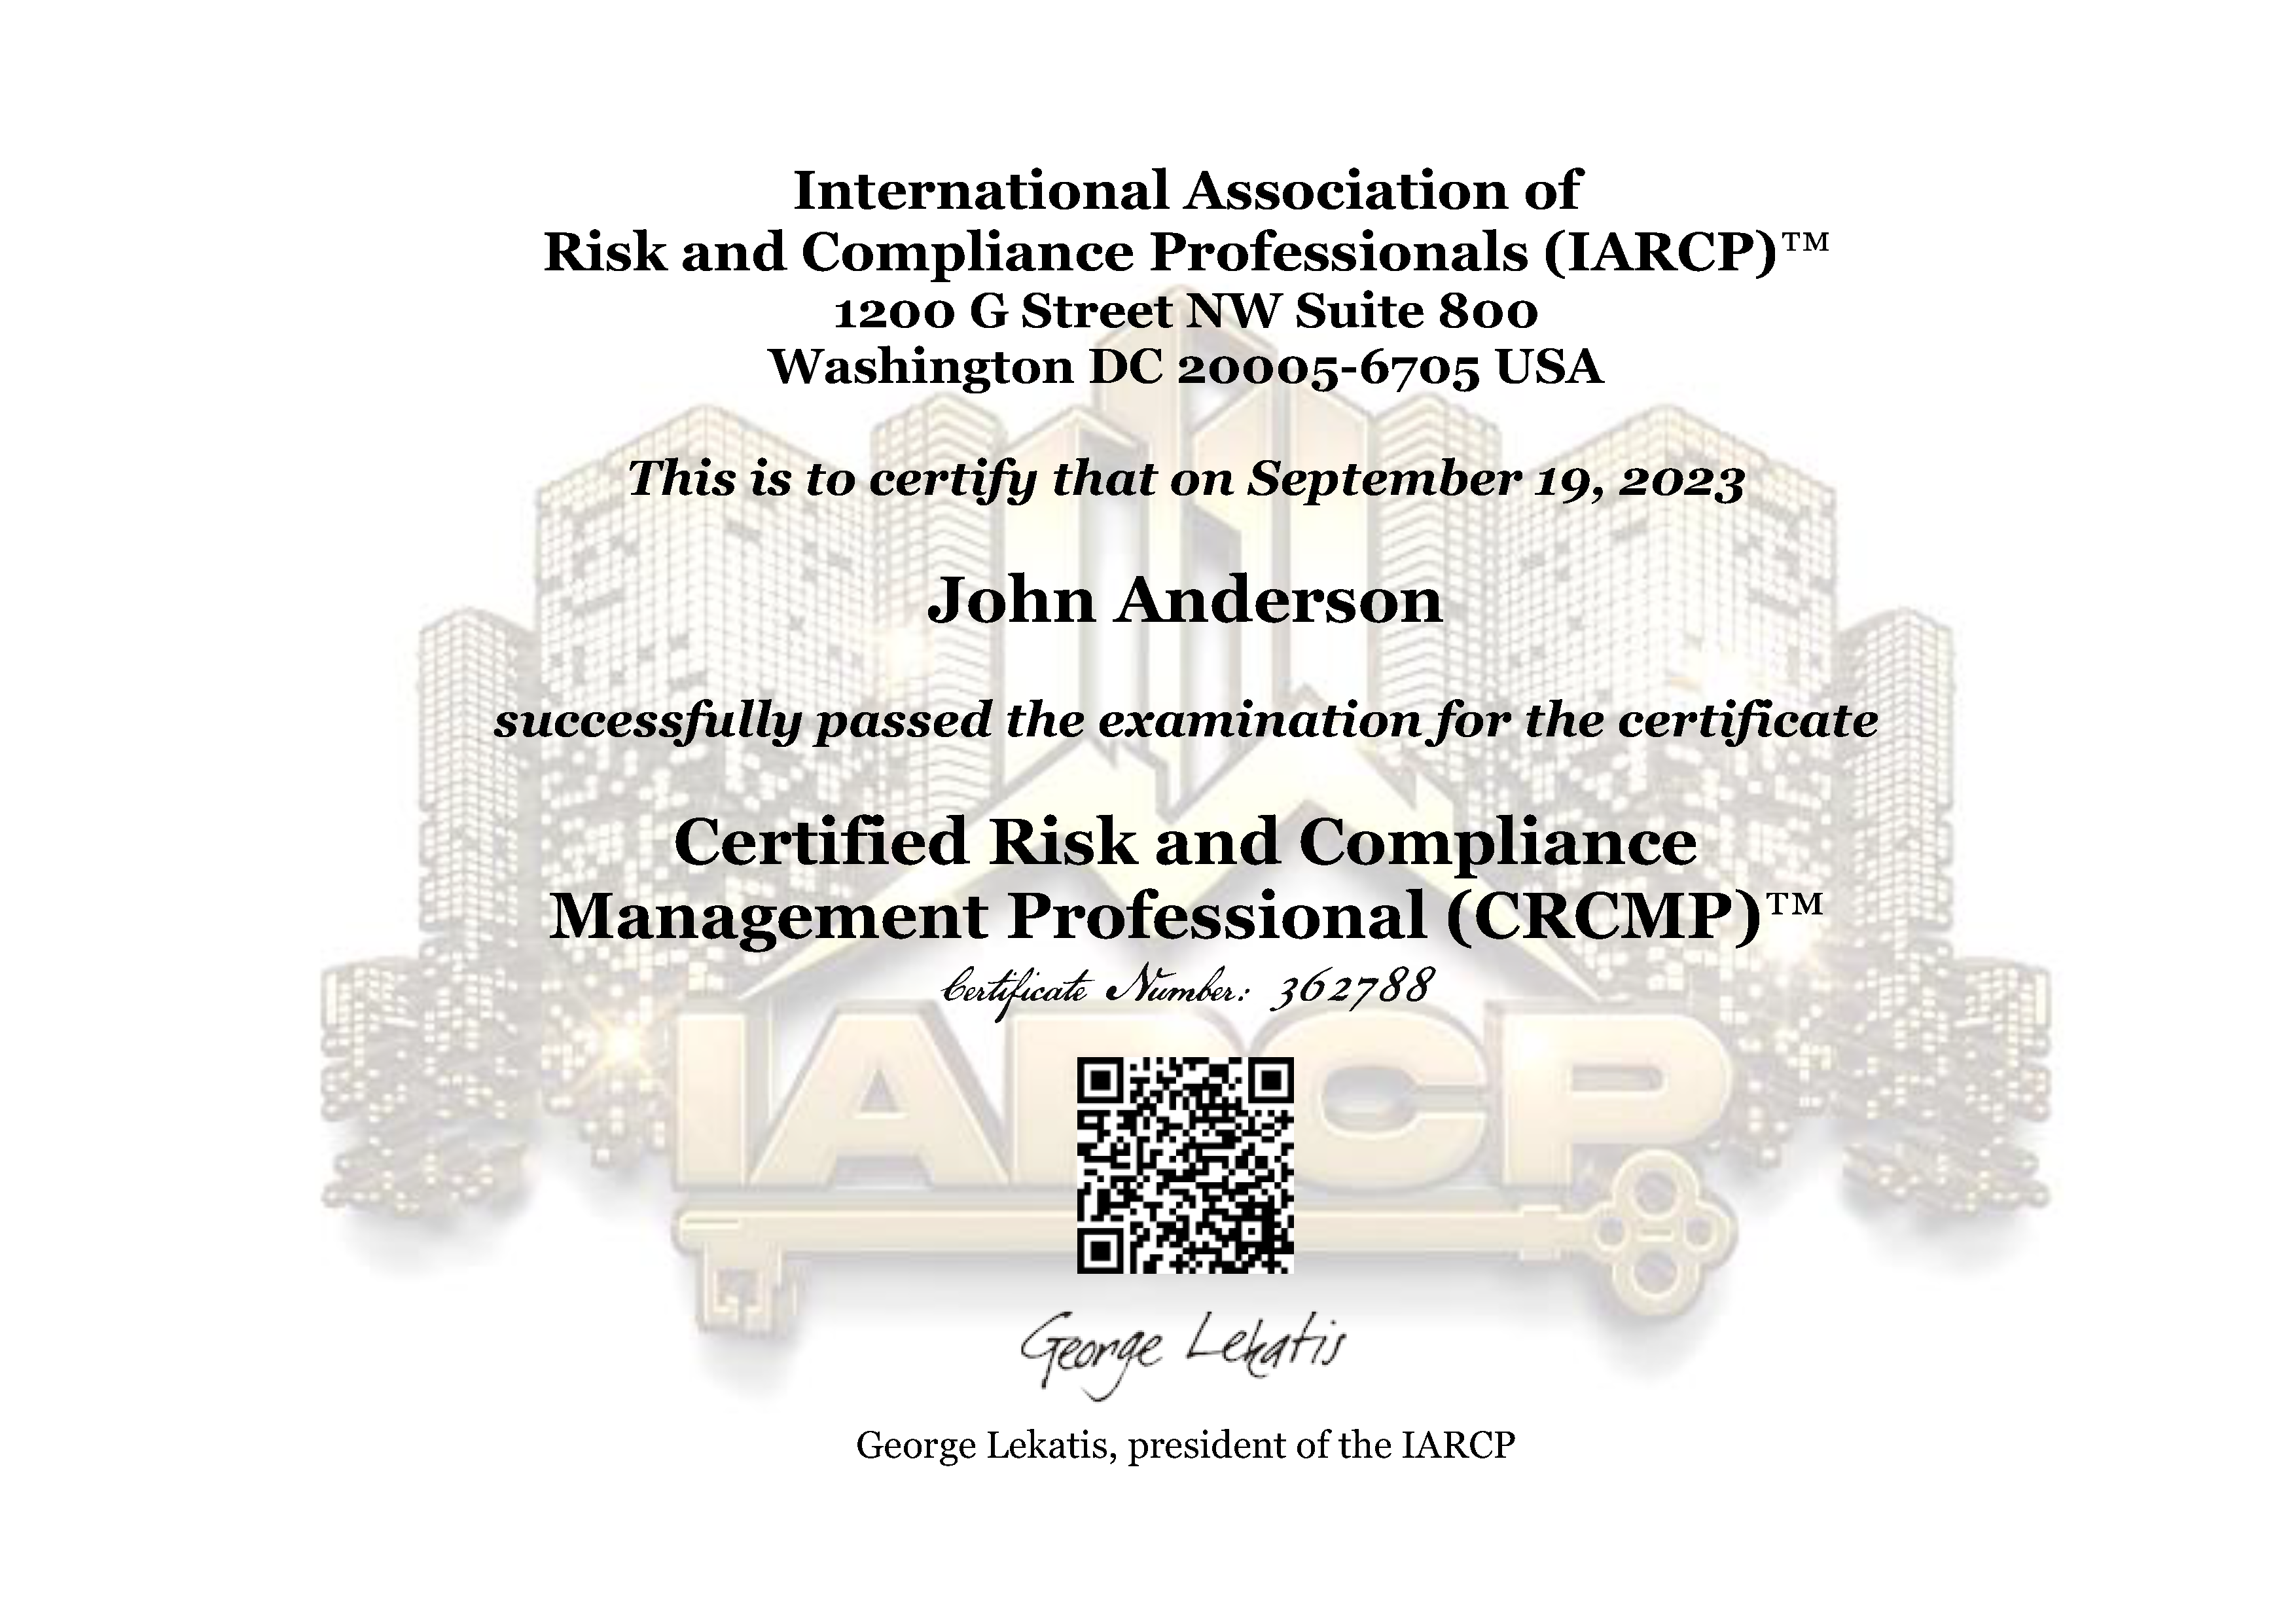 Certified Risk and Compliance Management Professional (CRCMP)